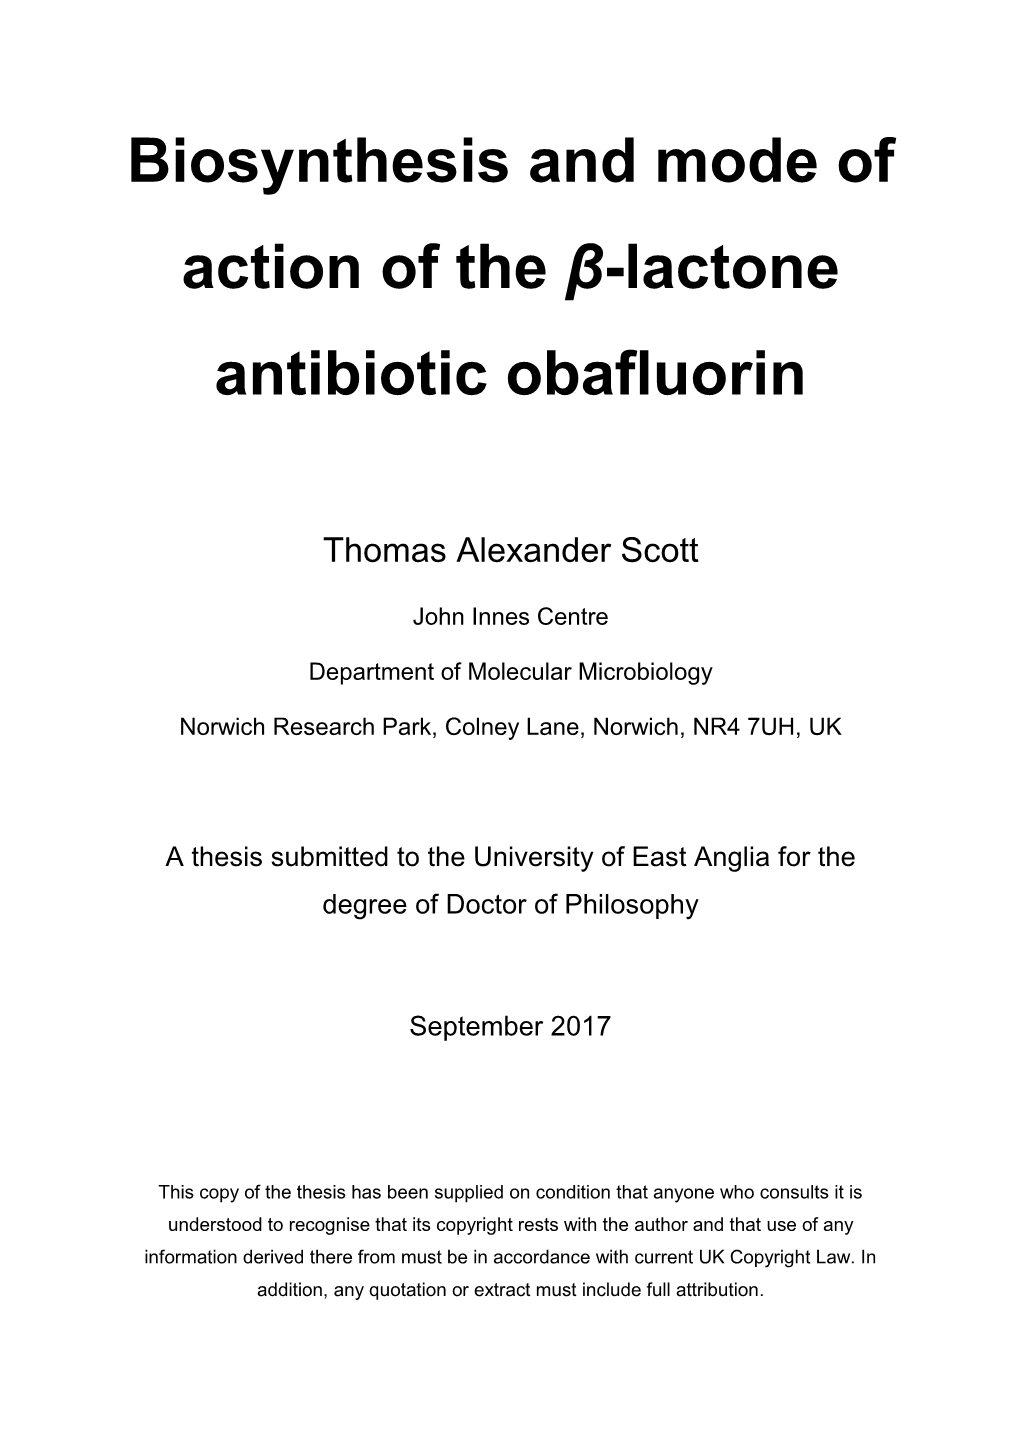 Biosynthesis and Mode of Action of the Β-Lactone Antibiotic Obafluorin